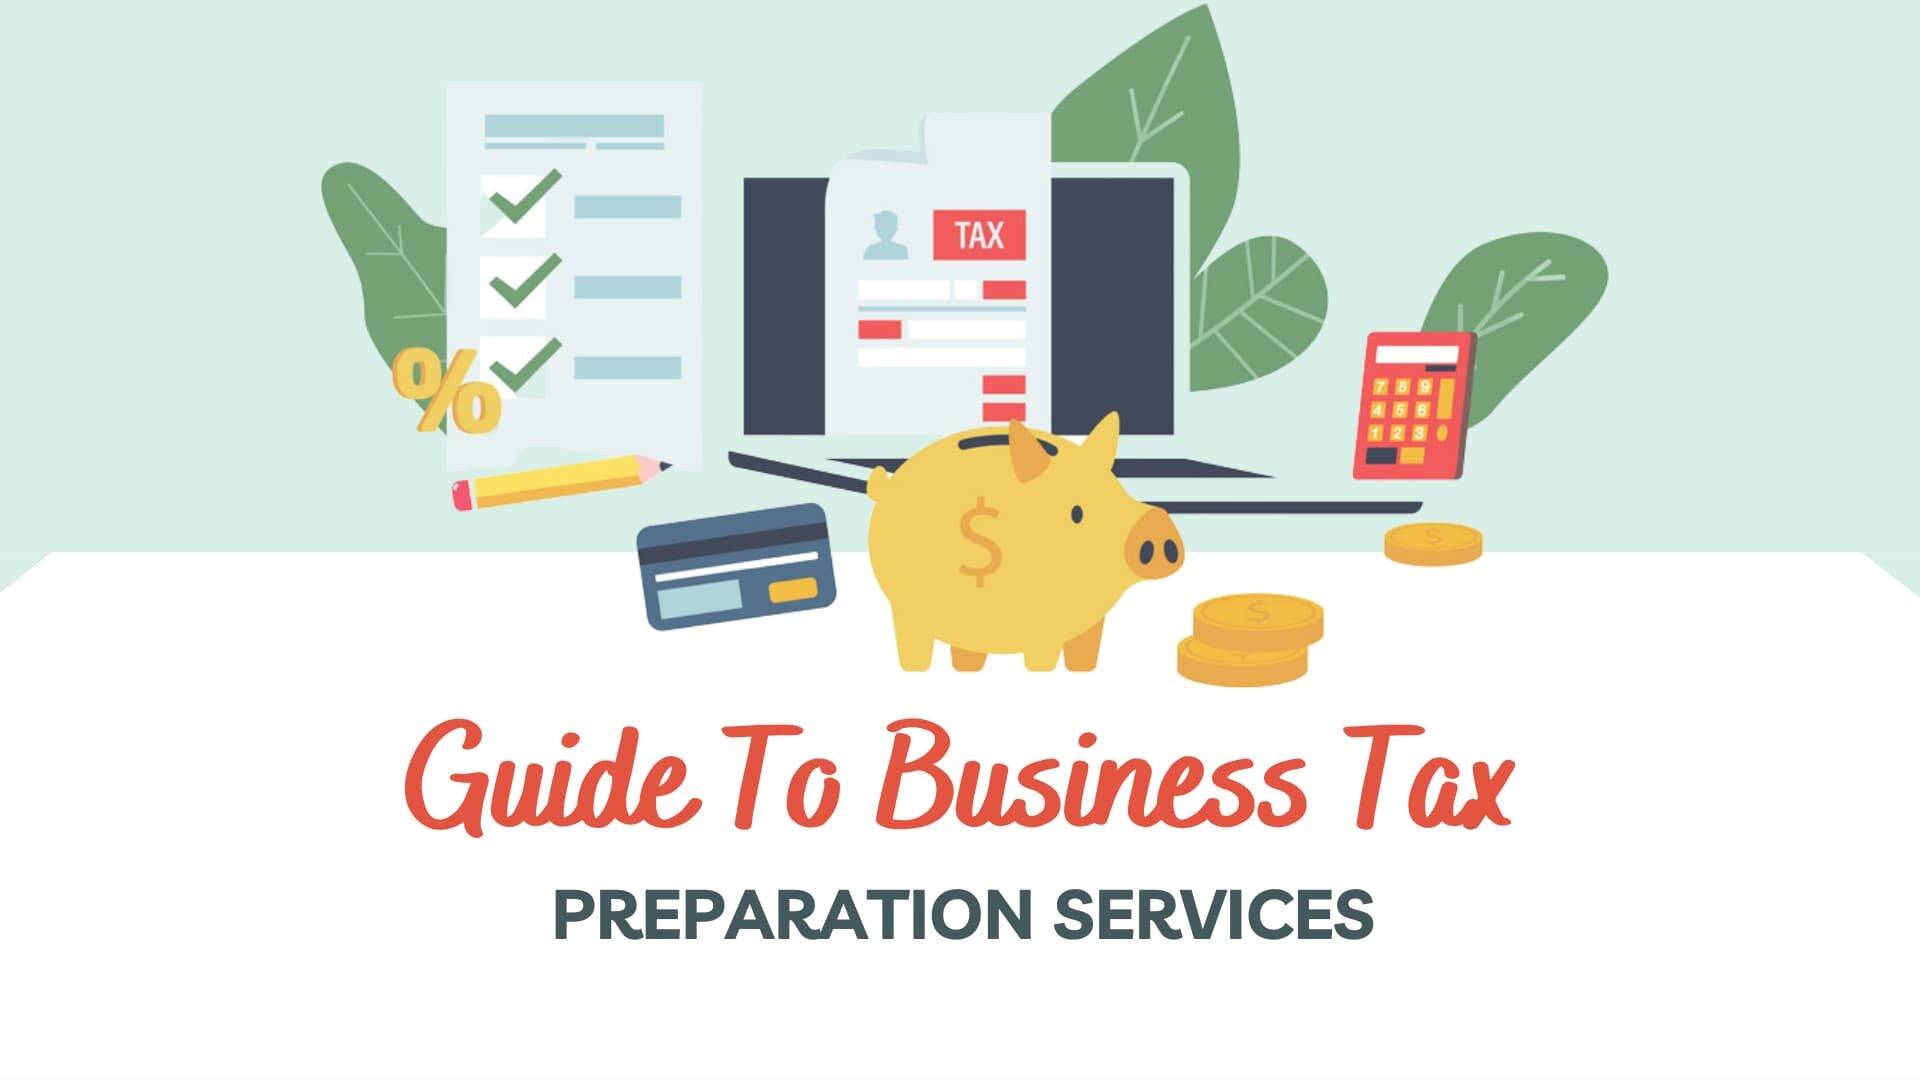 Guide To Business Tax Preparation Services